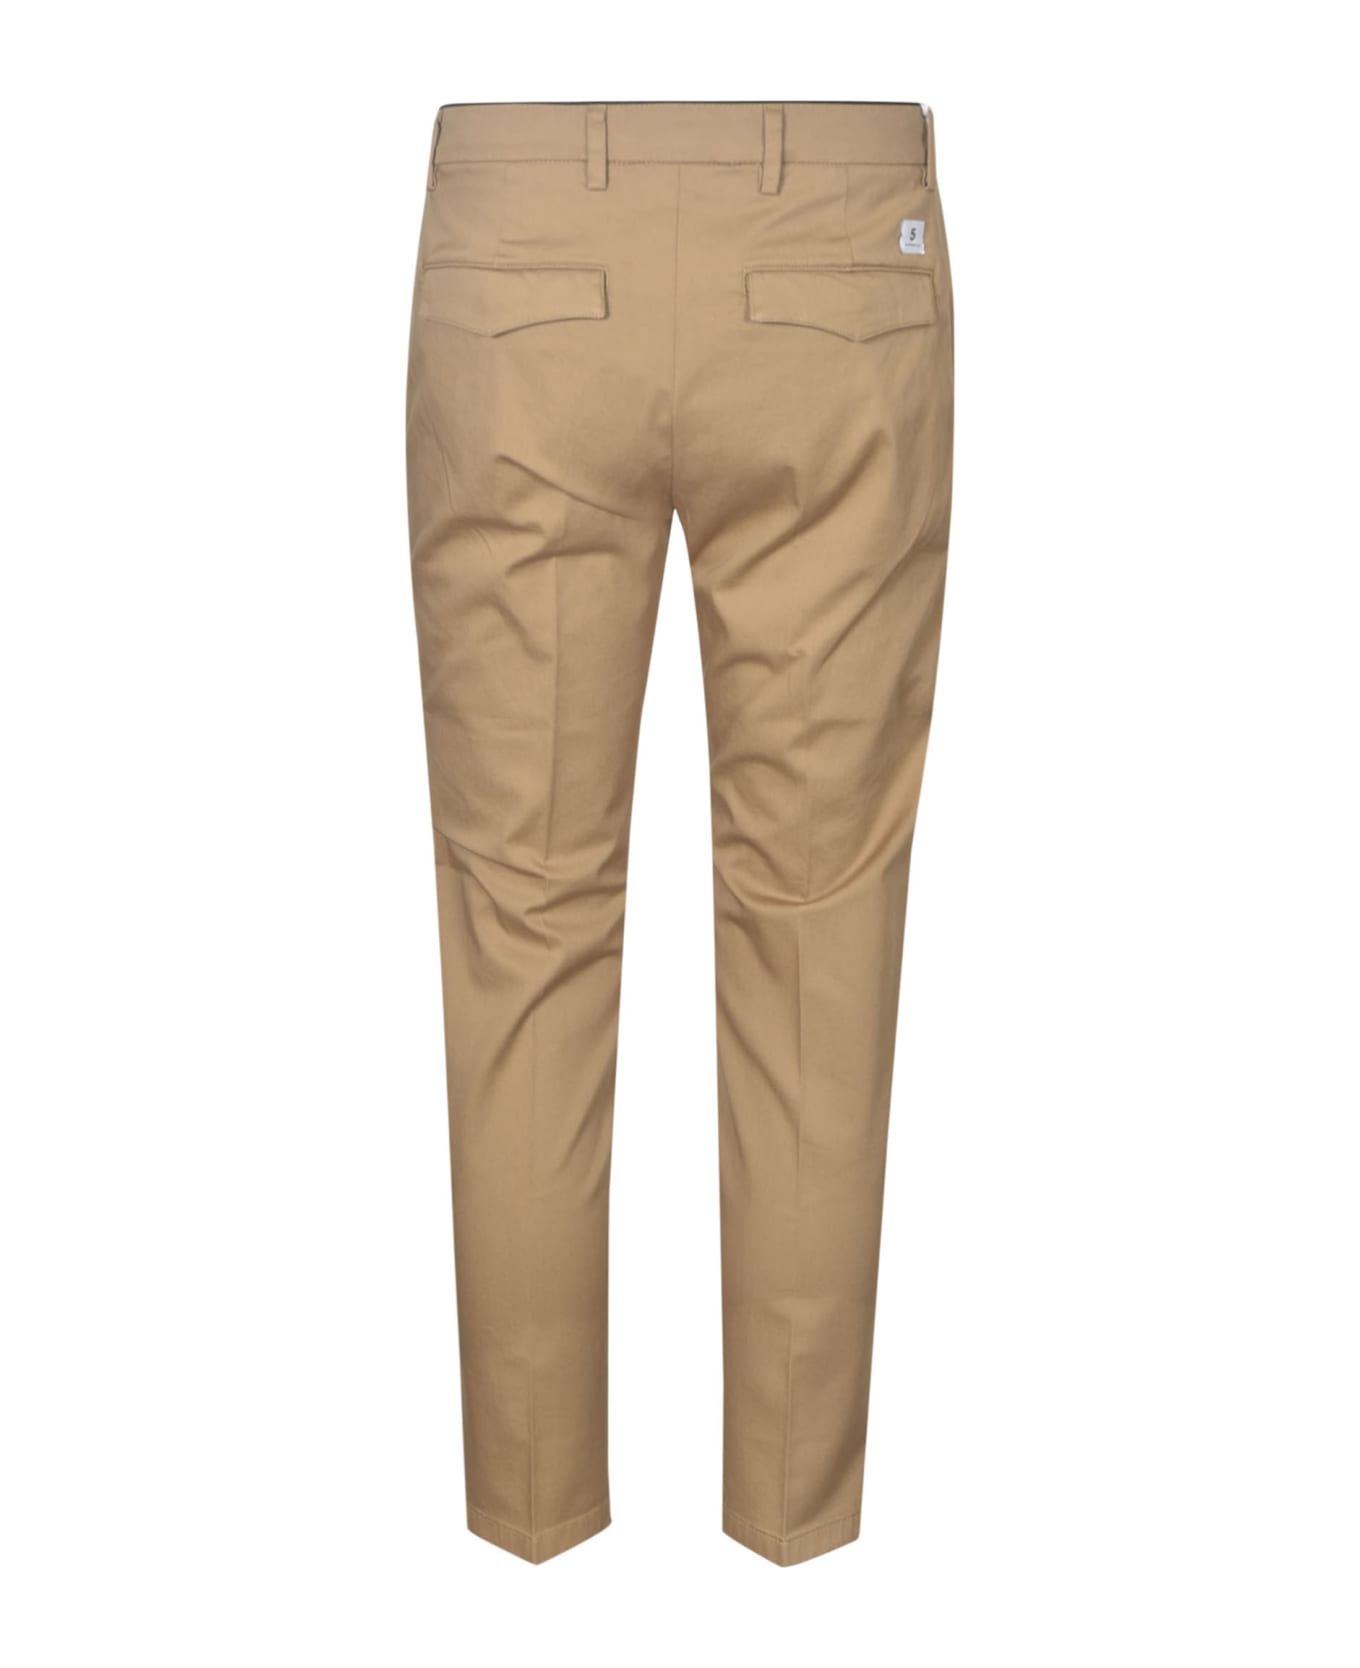 Department Five Off Regular Trousers - Beige ボトムス